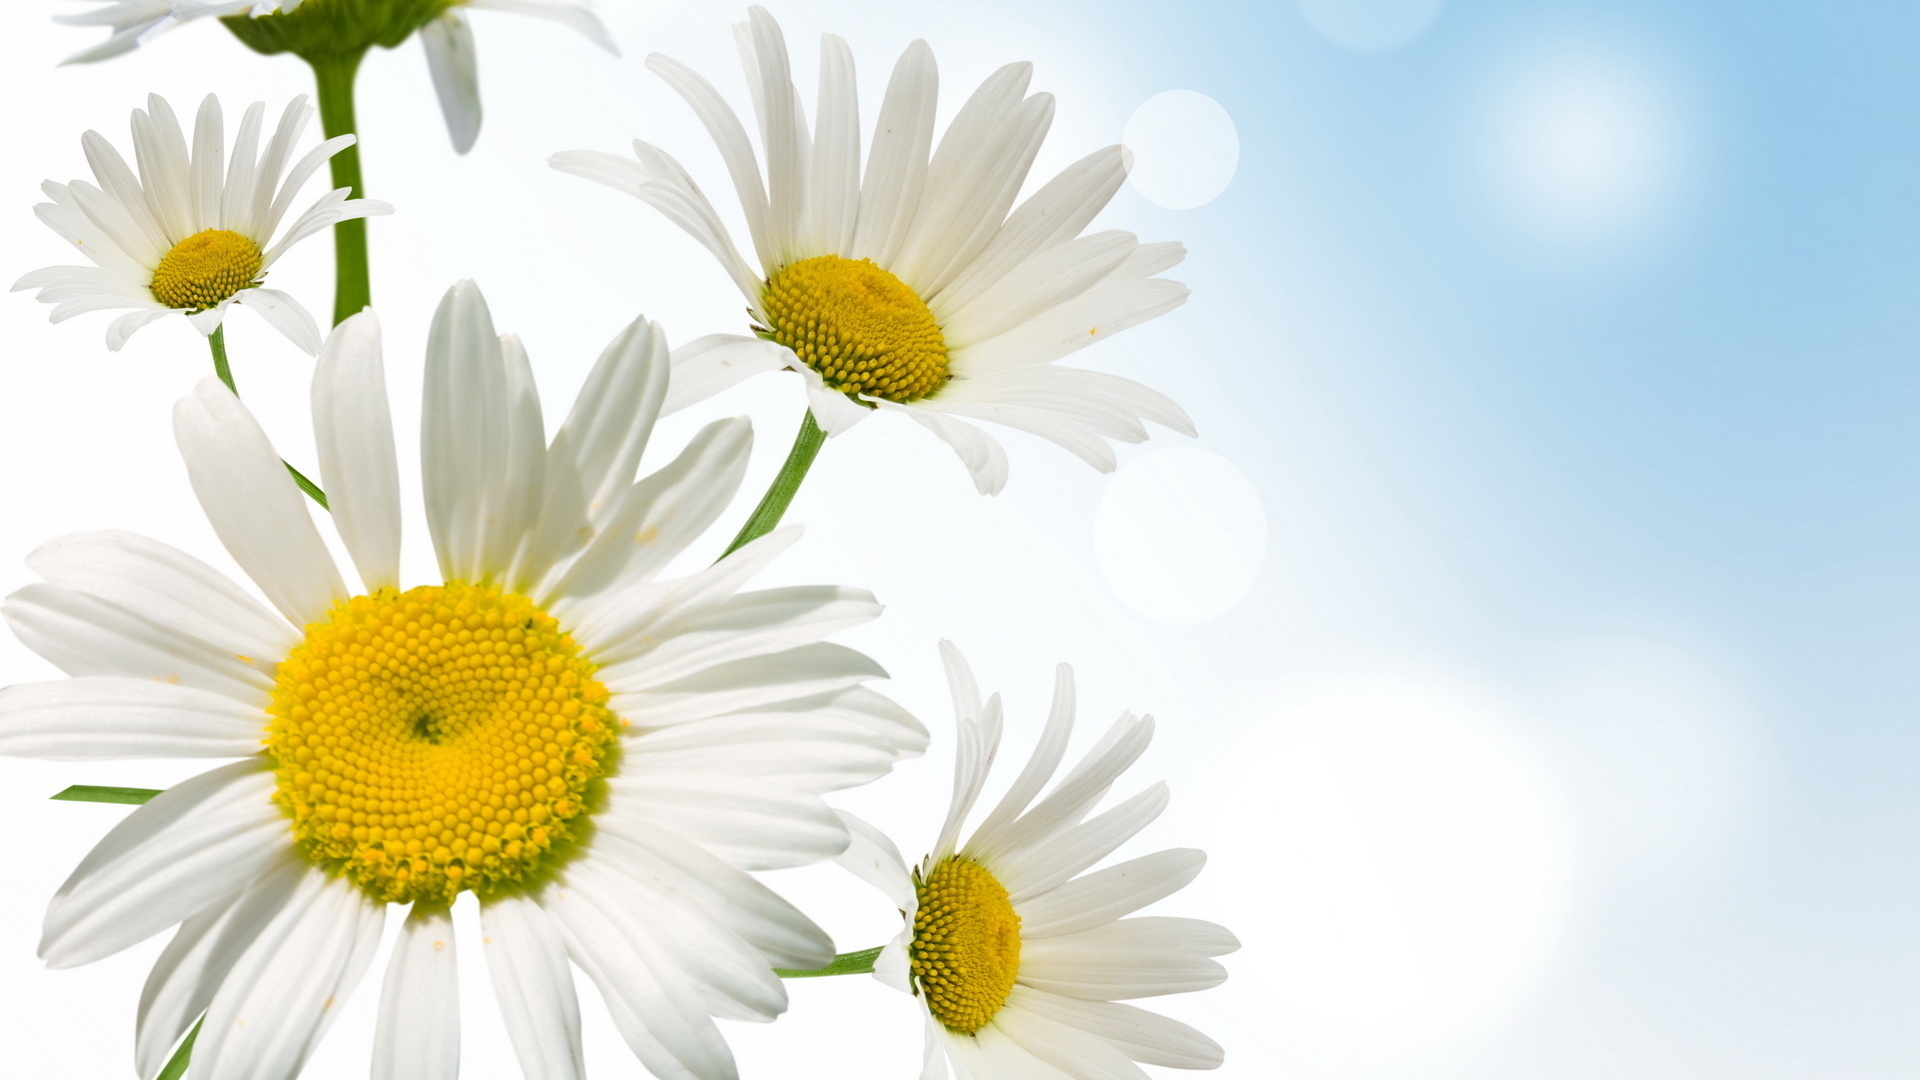 april  showers bring may flowers daisies download wallpaper